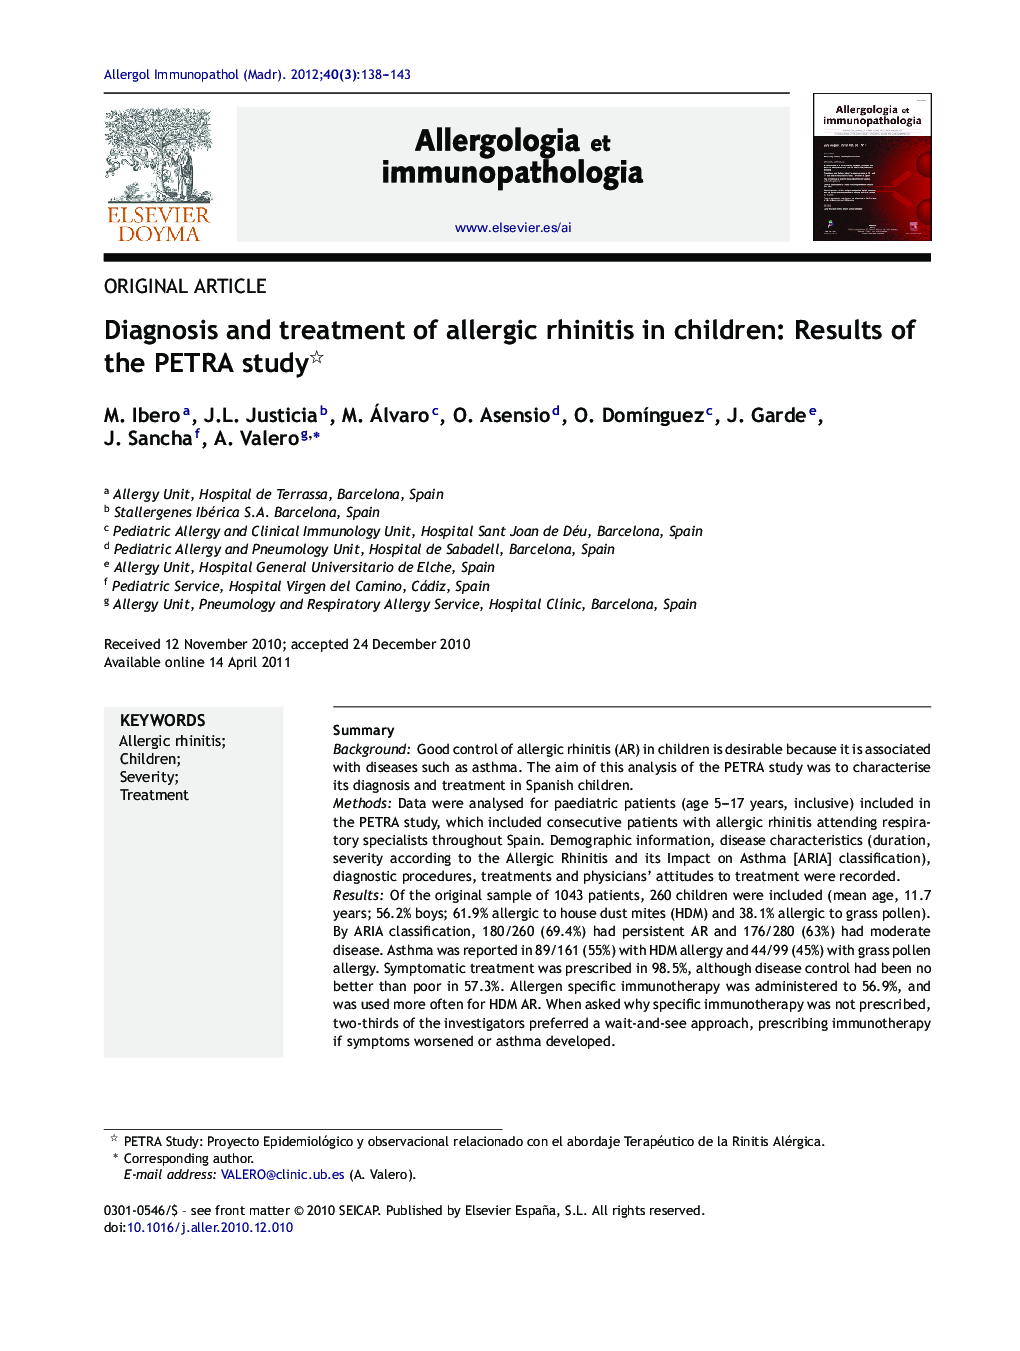 Diagnosis and treatment of allergic rhinitis in children: Results of the PETRA study